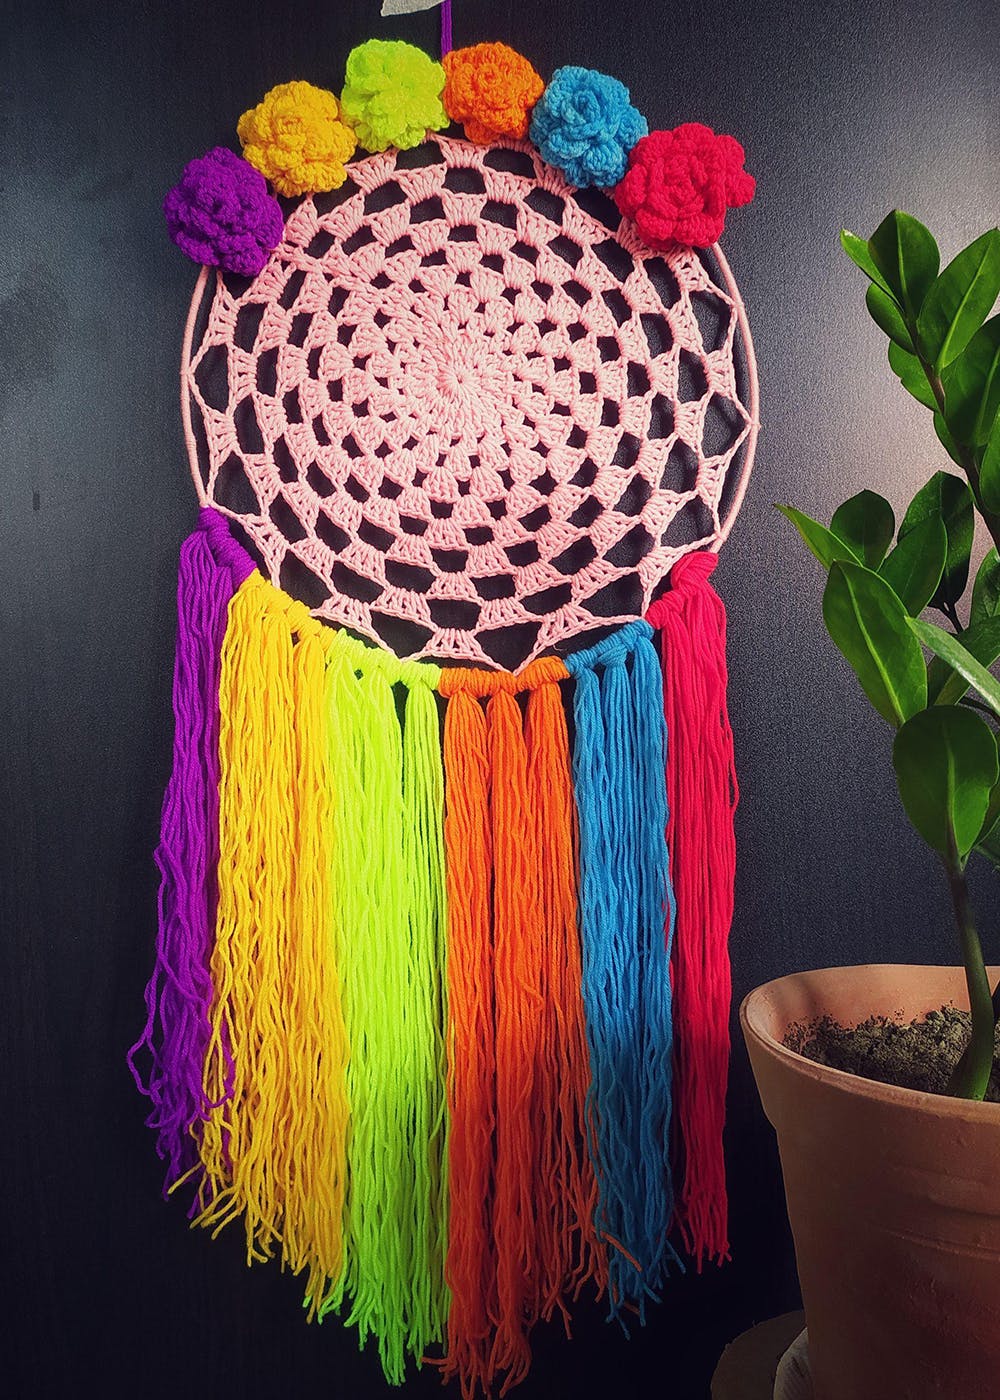 Get Handcrafted Crochet Multi Colored Dreamcatcher at ₹ 1070 | LBB Shop